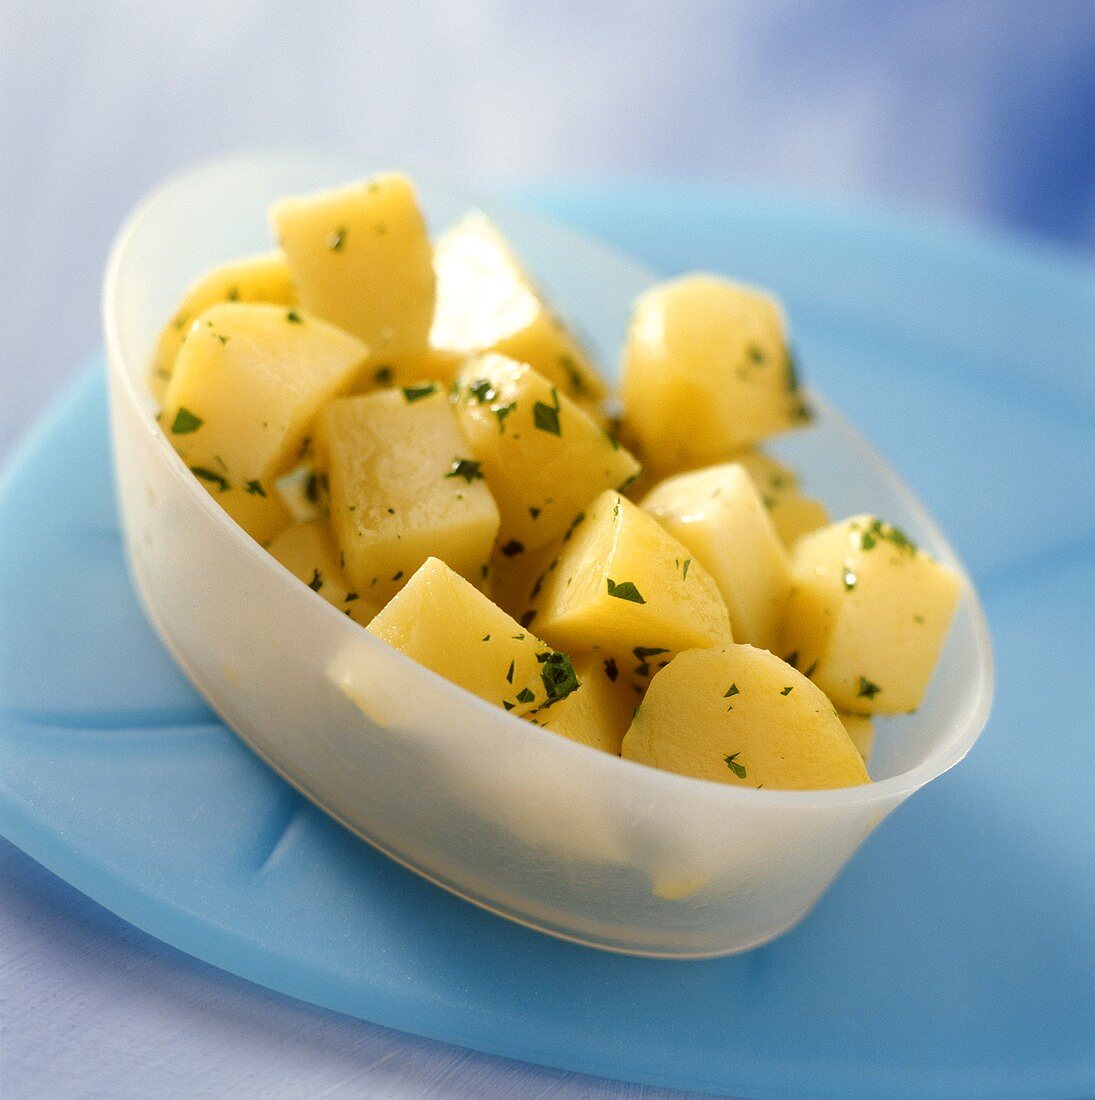 Potatoes with herbs